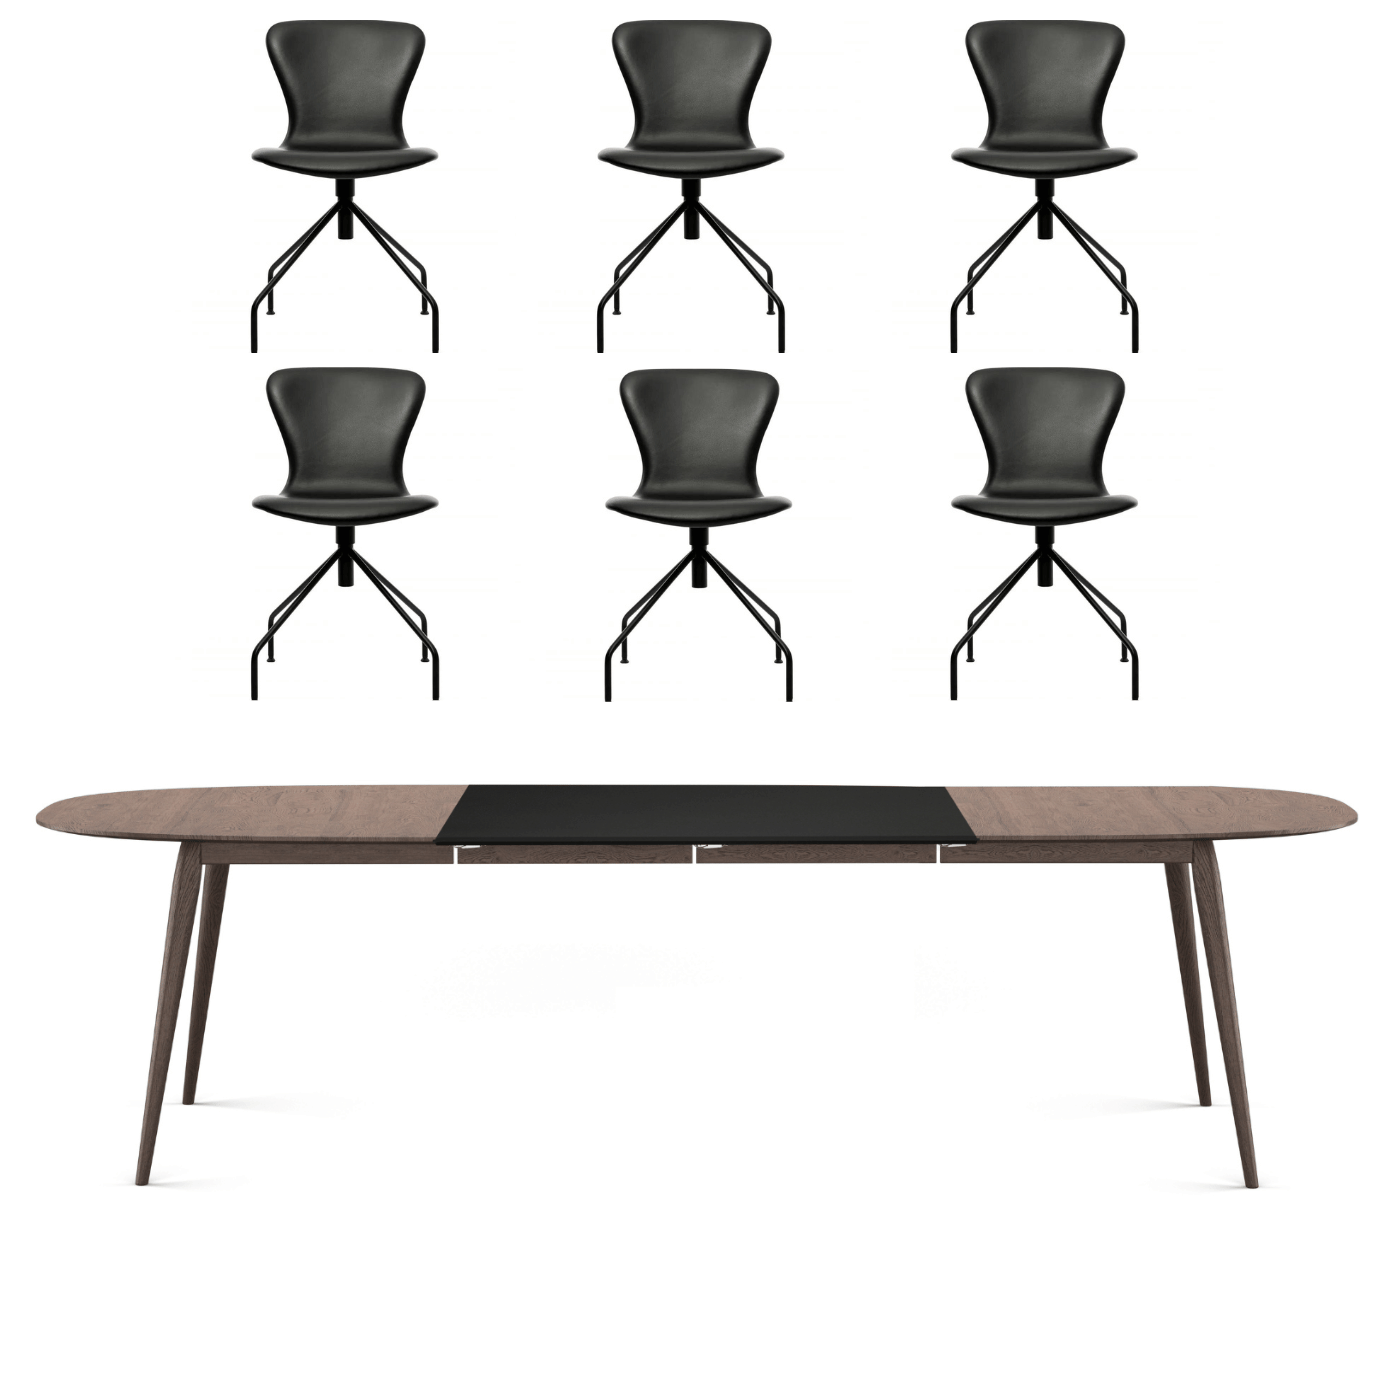 Bruunmunch Dining Bundle Playdinner Lame Table In Smoked Oak 2 X Extension Leaf In Mdf Black Clear Lacquer 6 X Playchair Swing In Black Leather De